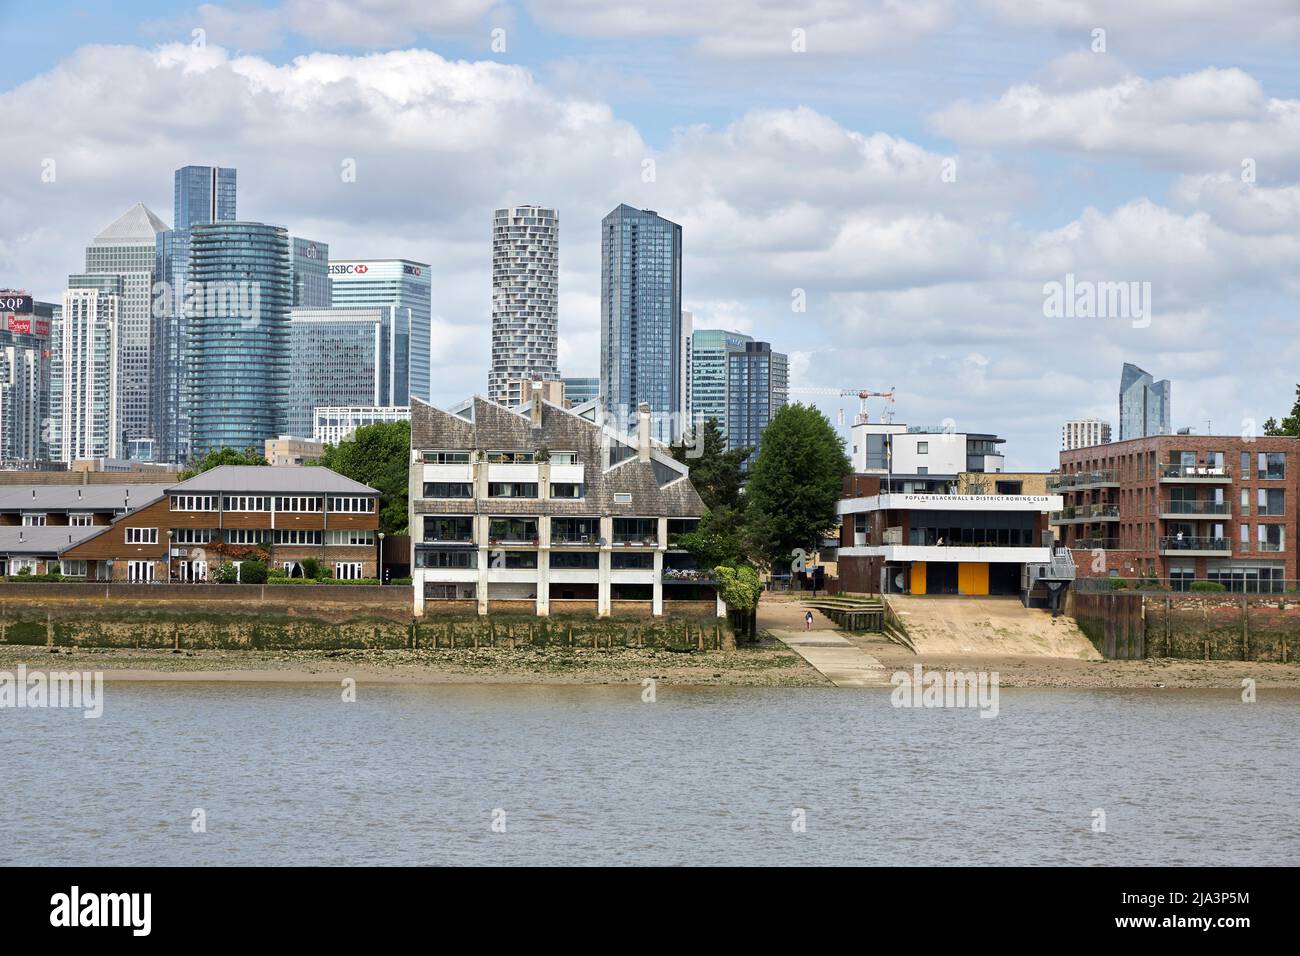 Isle of Dogs, London viewed from across the Thames in Greenwich. Stock Photo